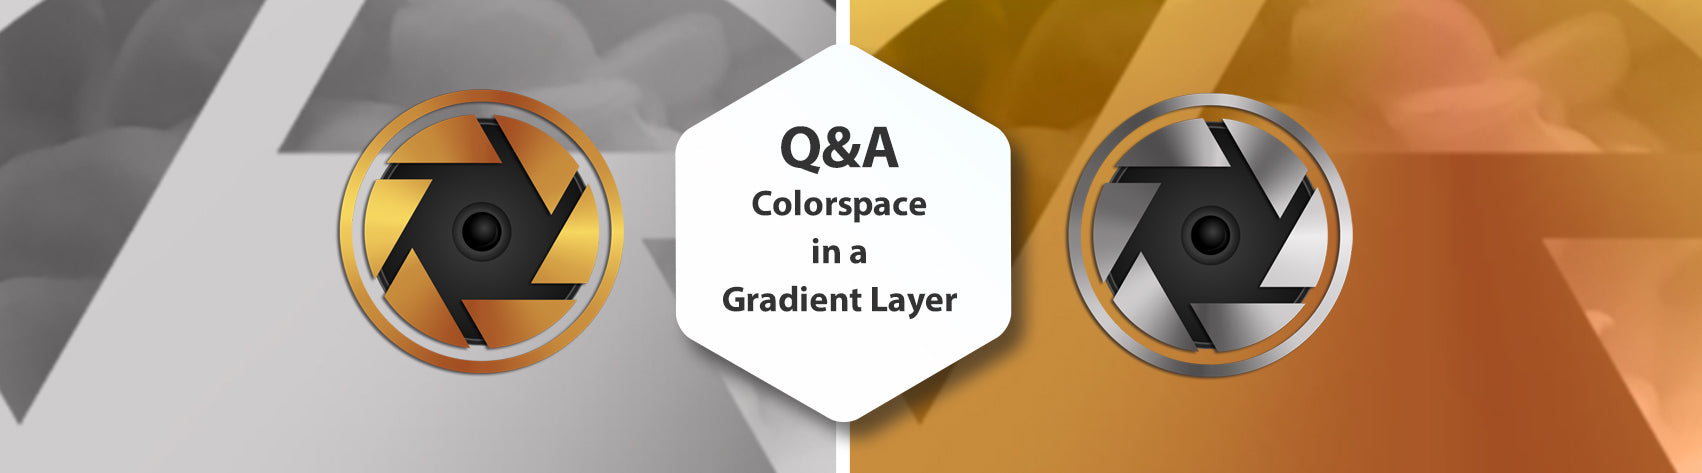 Q&A - Colorspace In A Gradient